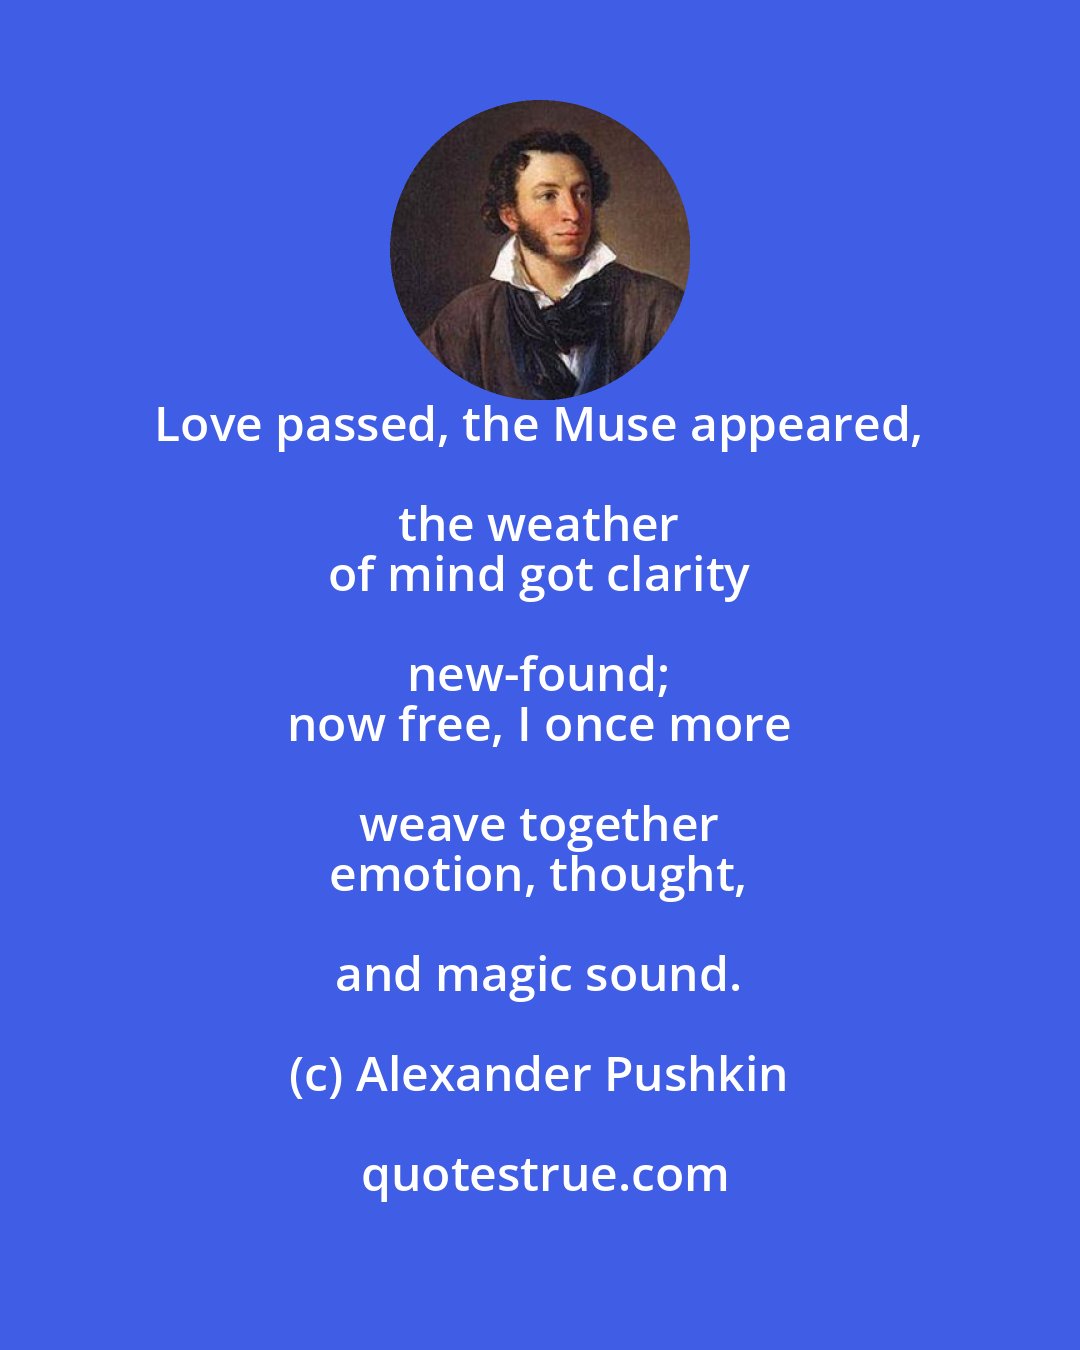 Alexander Pushkin: Love passed, the Muse appeared, the weather 
 of mind got clarity new-found; 
 now free, I once more weave together 
 emotion, thought, and magic sound.